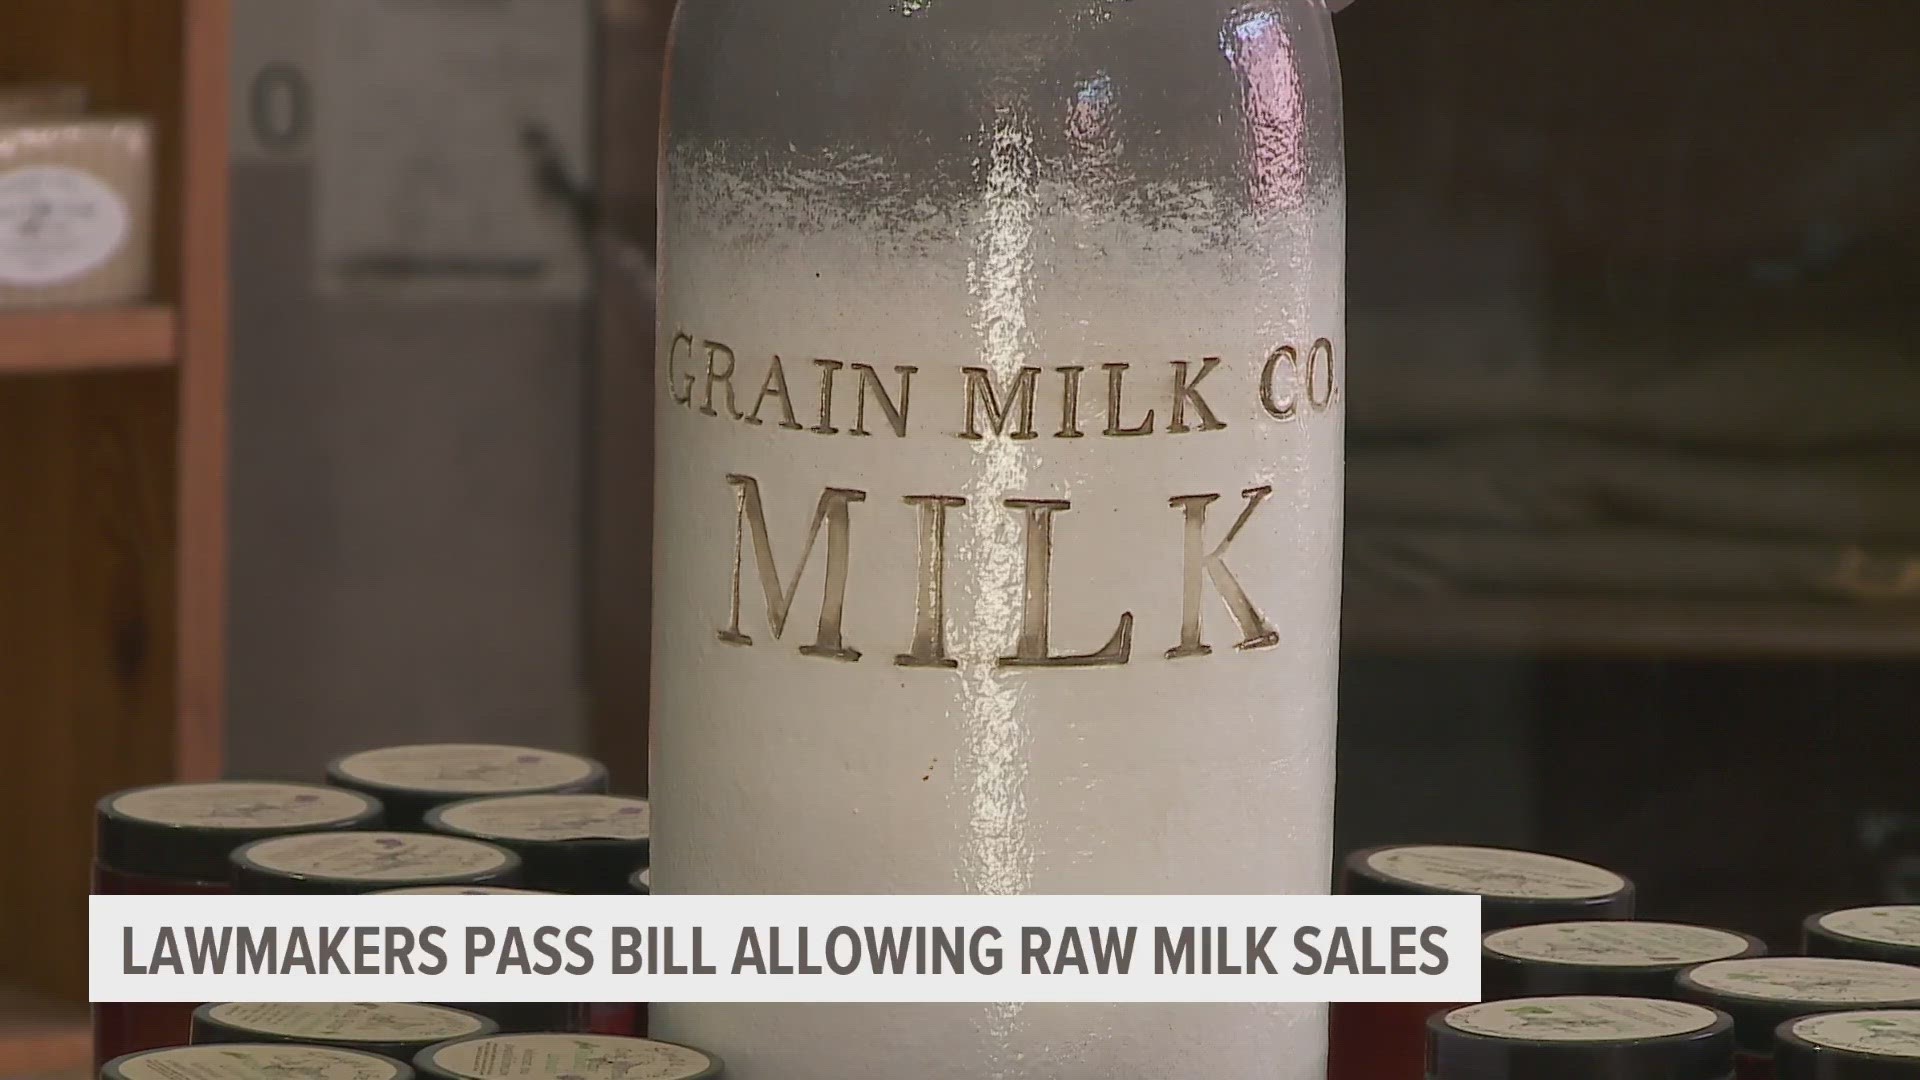 Raw milk is illegal to sell in Iowa for now, but one bill may change that. However, the lack of regulations around raw milk concern local dairy farmers.